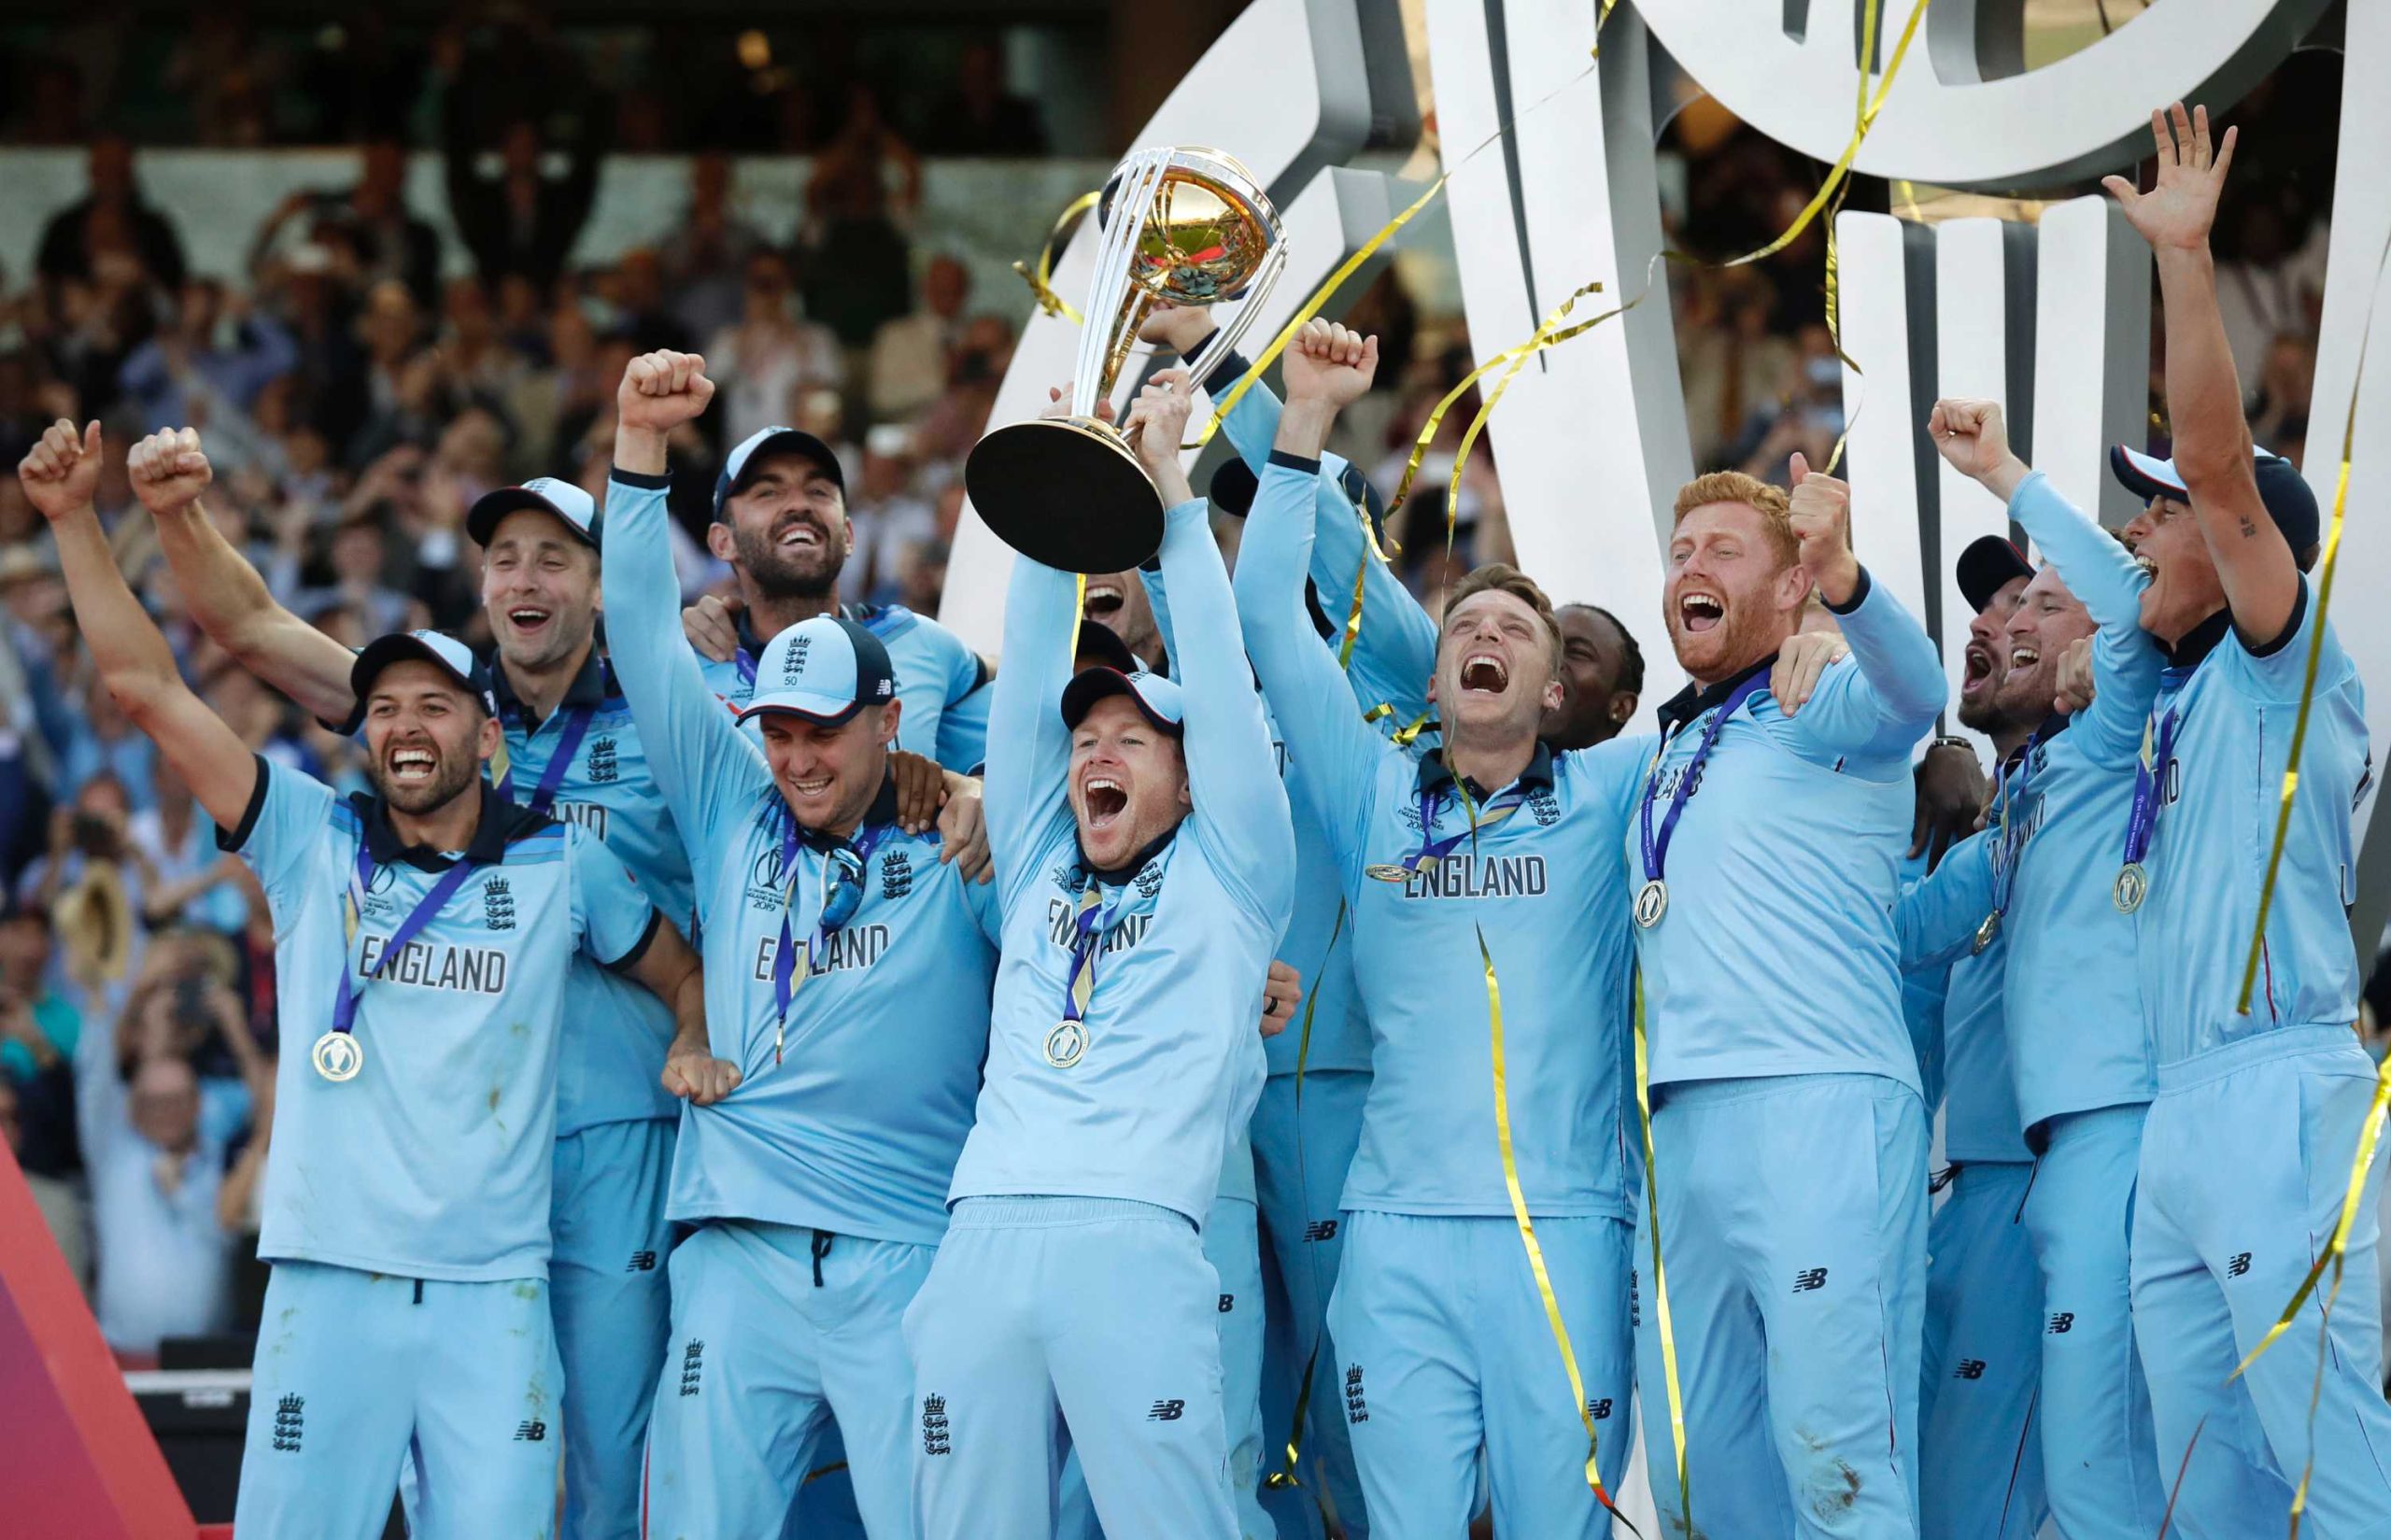 2019 Cricket World Cup Champions England, teams ODI World Cup Finals